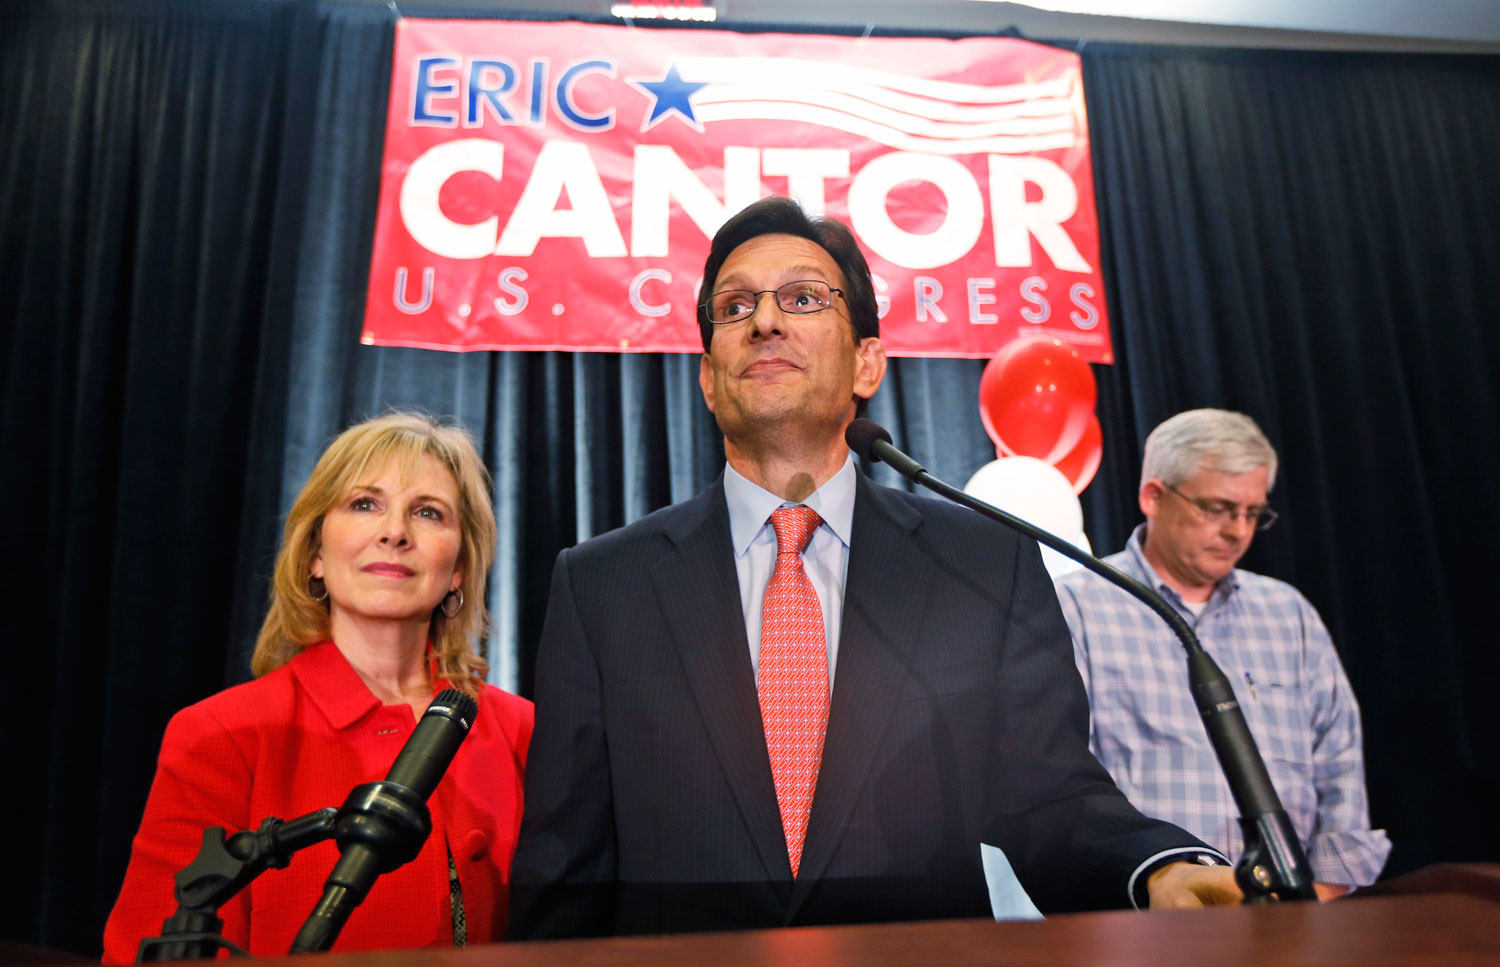 Eric Cantor Loses, and Immigration Reform Is Damaged